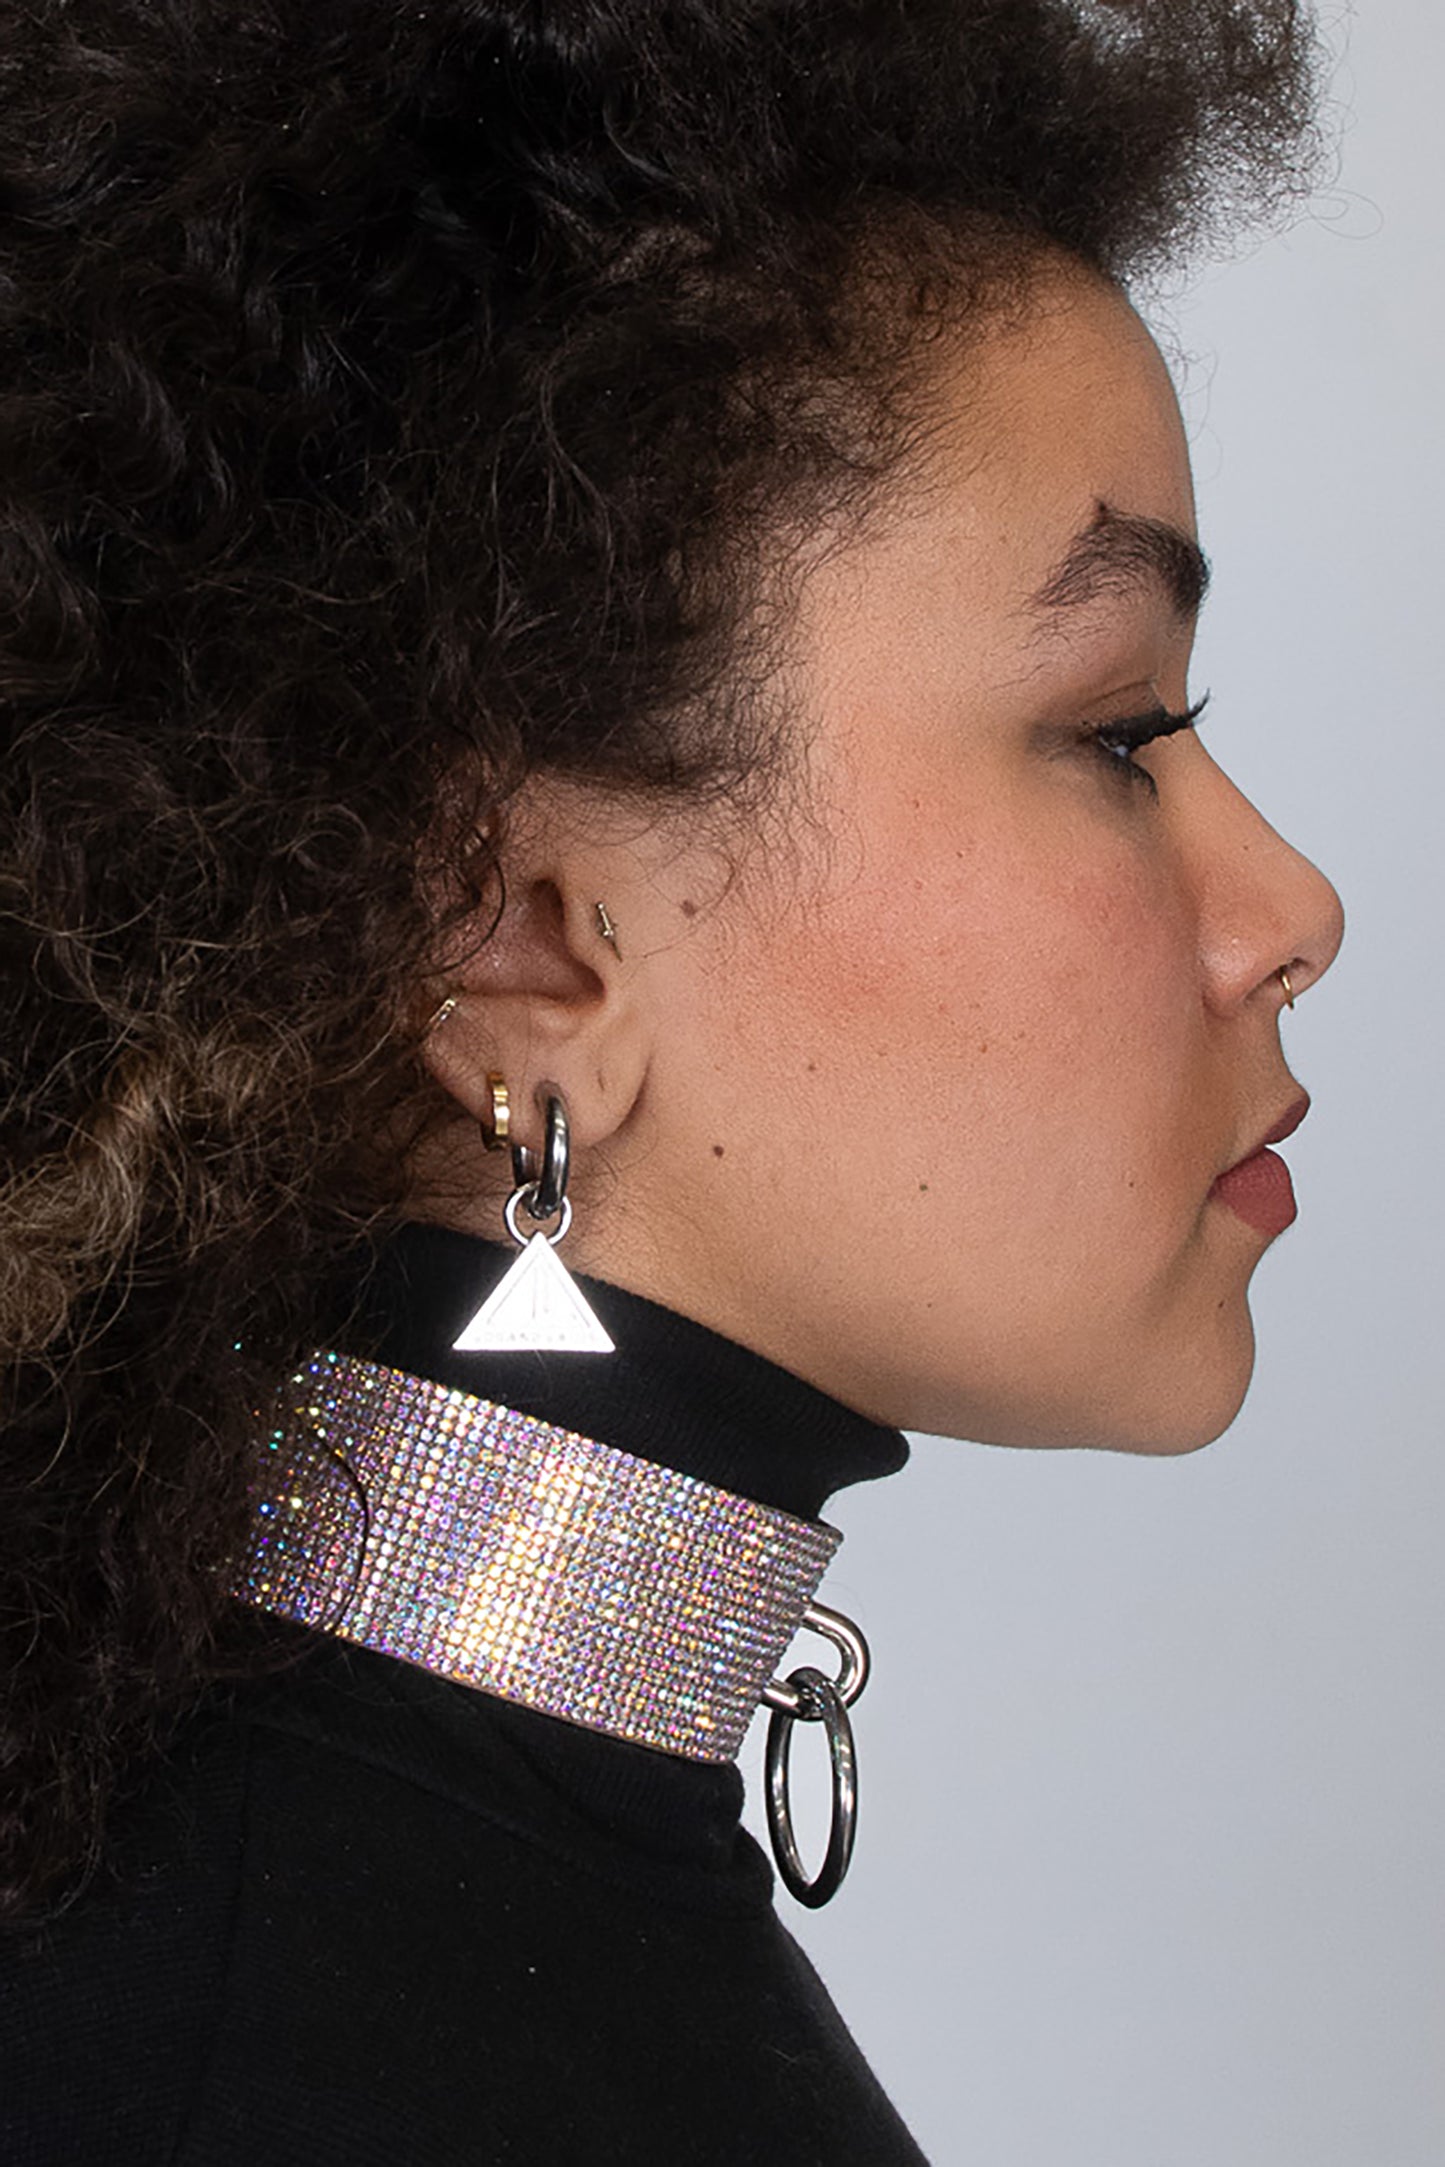 Shiny rhinestone choker featuring a sparkling surface, front ring detail, and adjustable back buckle, offered in multicolor